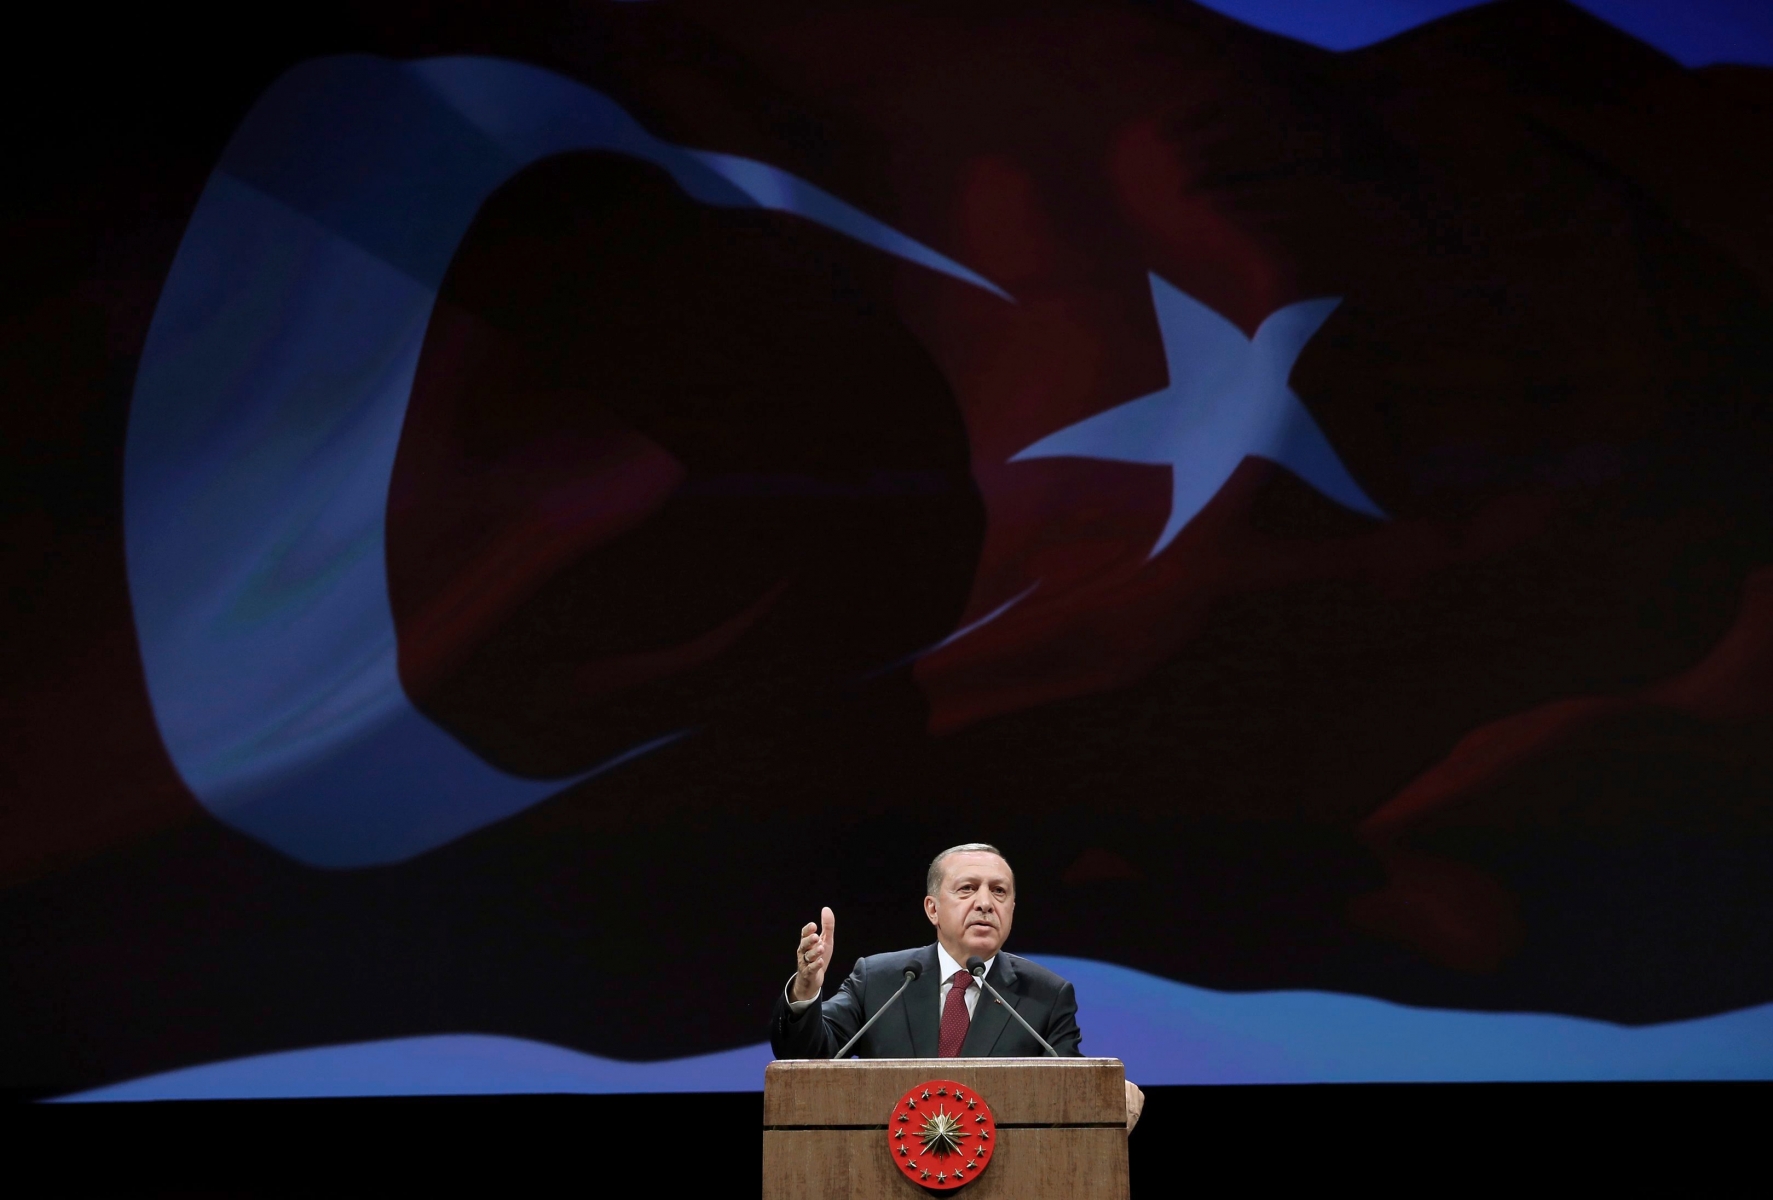 Turkey's President addresses police officers in Ankara, Turkey, Tuesday, Nov. 22, 2016. Turkey's government on Tuesday dismissed a further 15,000 people from the military, police and the civil service as part of an ongoing investigation into the failed military coup in July. Erdogan said Tuesday that the civil service was still not entirely purged of U.S.-based Muslim cleric Fethullah Gulen's followers and vowed take all measures necessary to eradicate the group. (Murat Cetinmuhurdar, Presidential Press Service, Pool photo via AP) Turkey Failed Coup